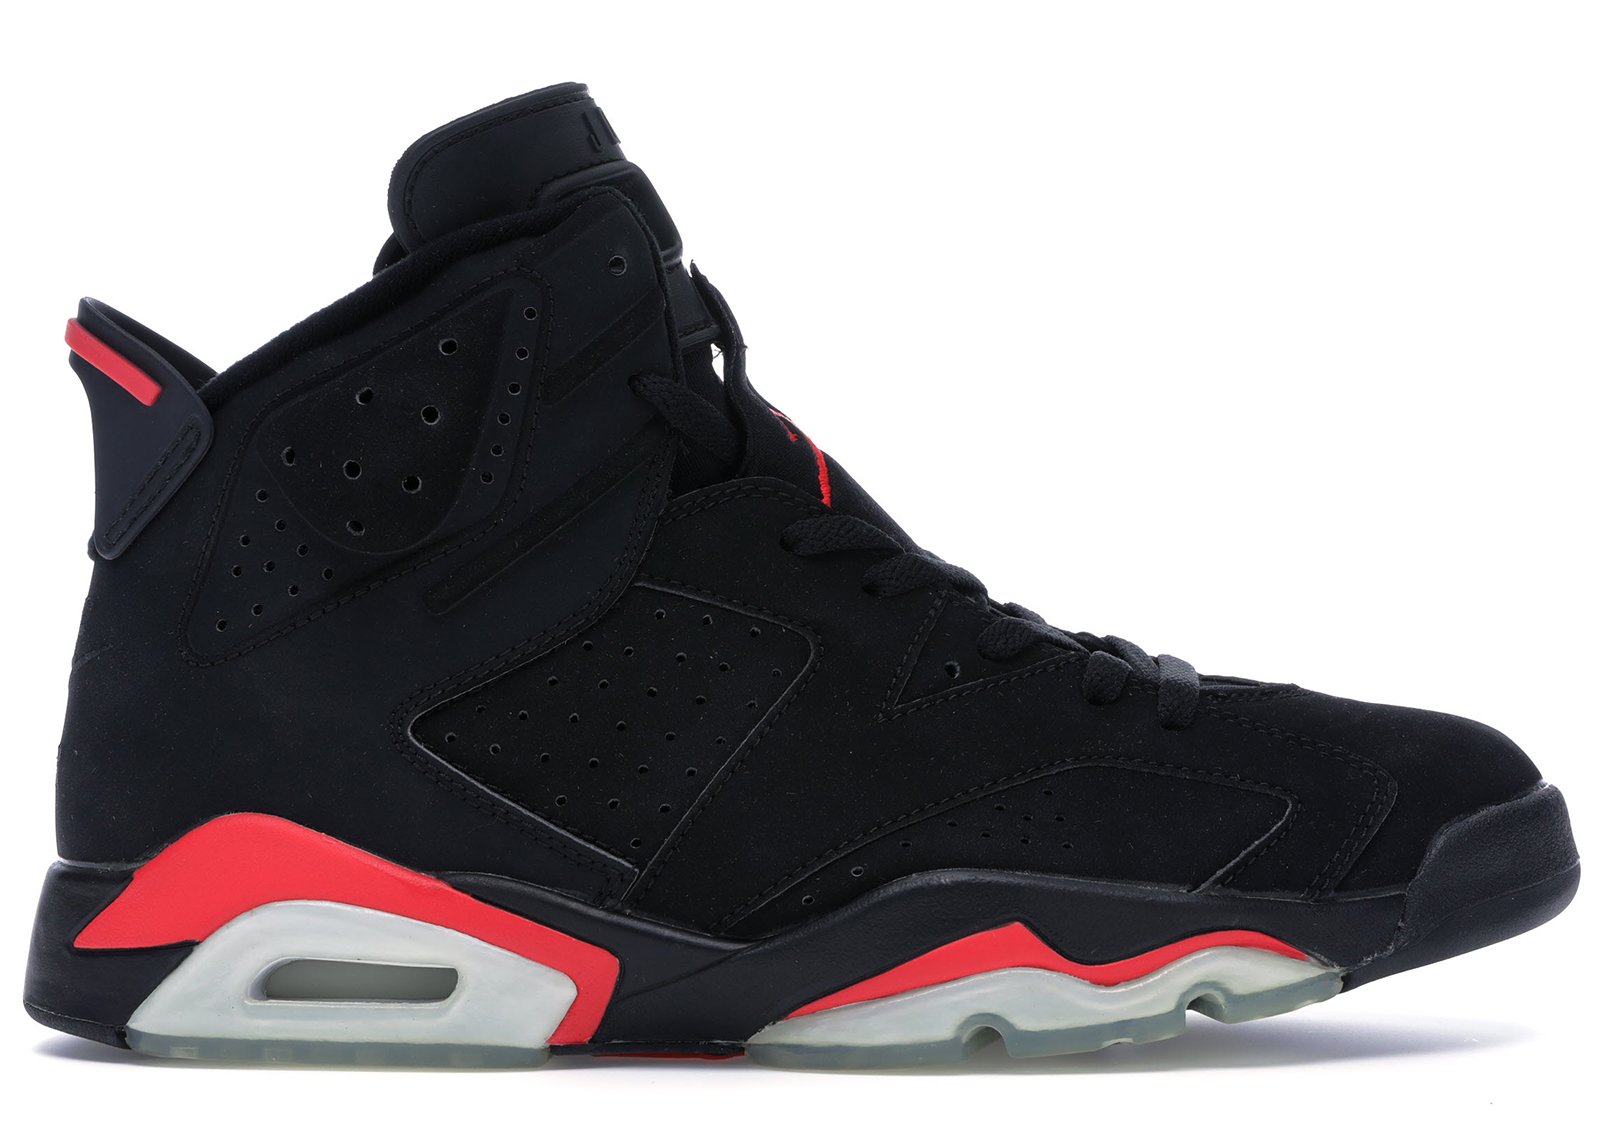 the infrared 6s